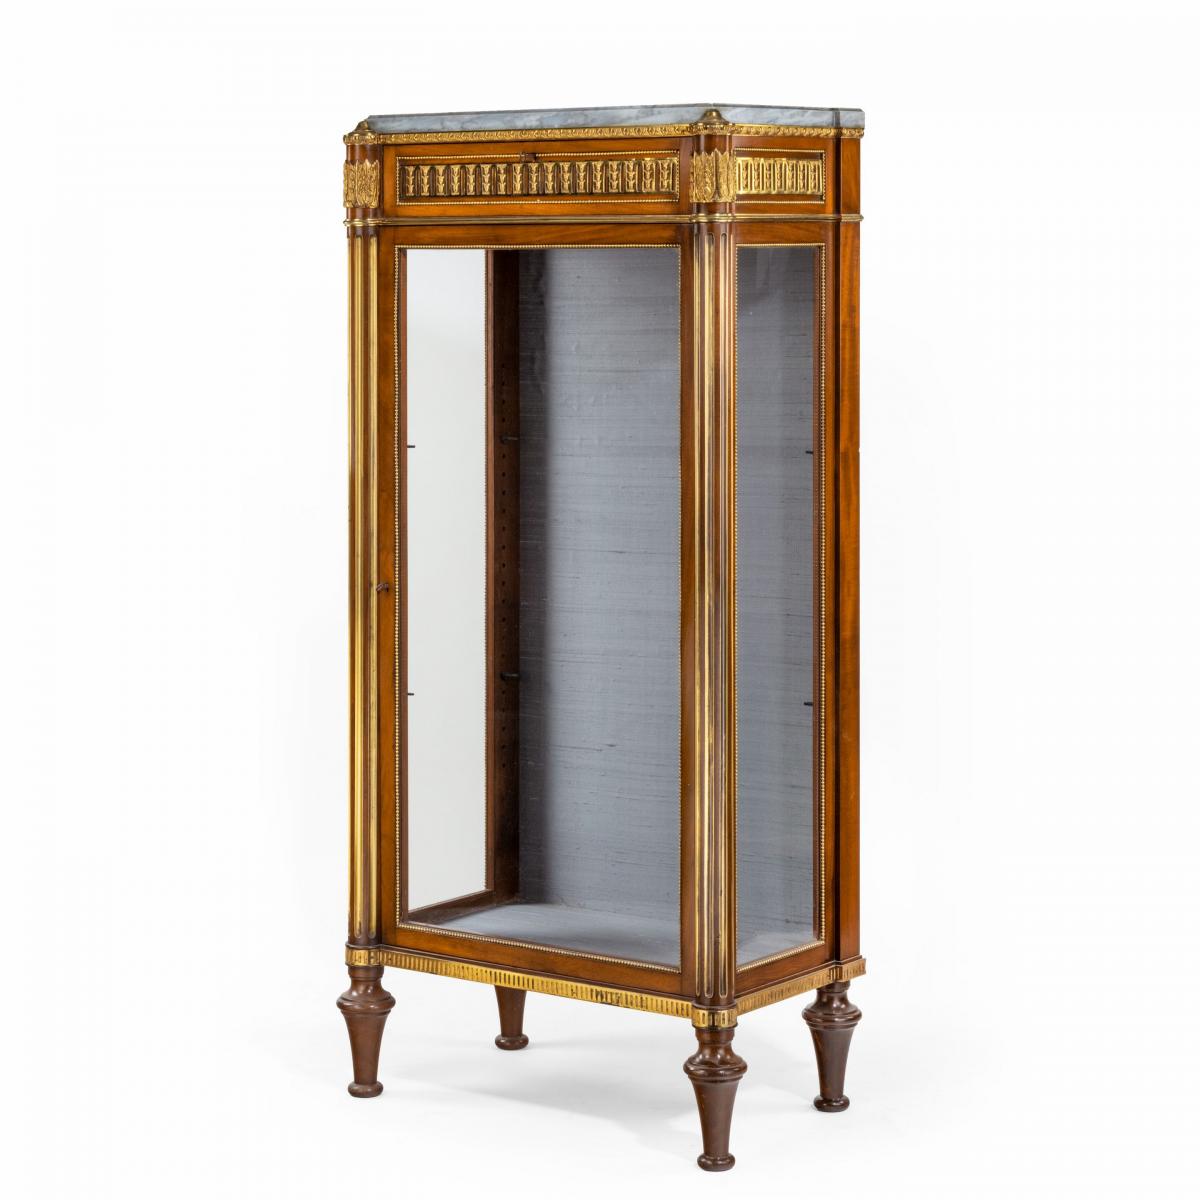 Victorian single door mahogany cabinet in the French taste